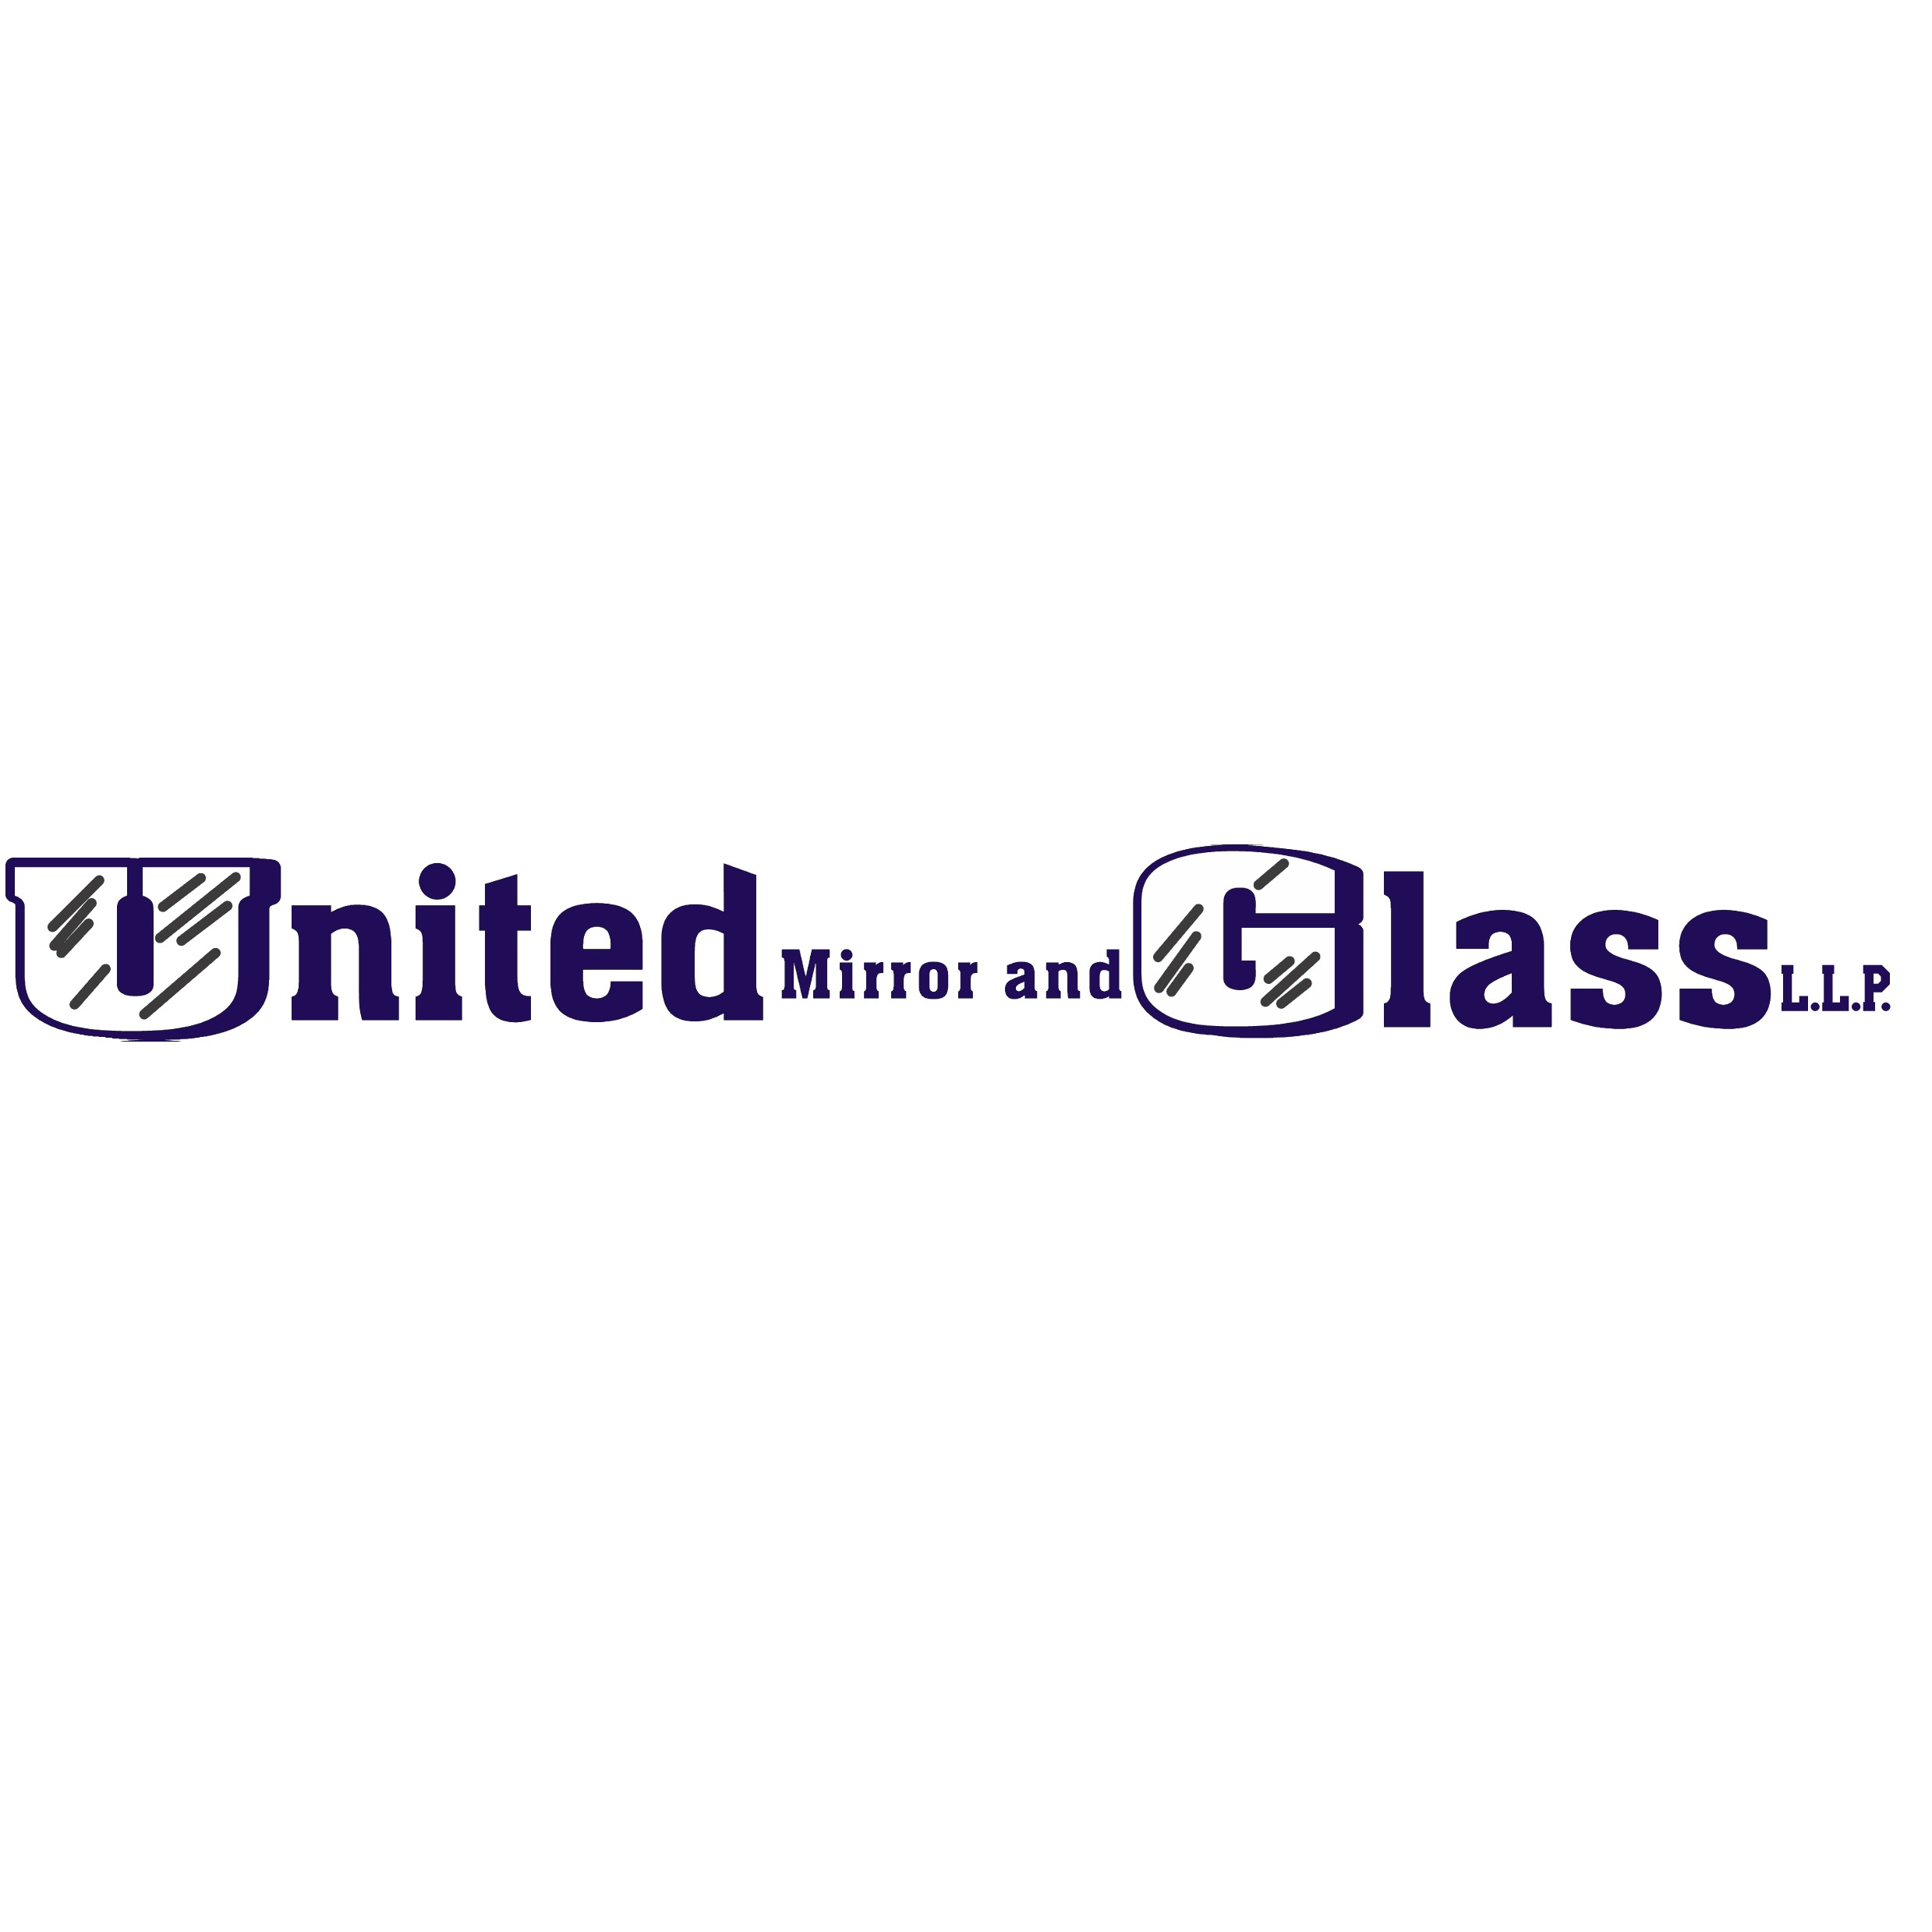 United Mirror and Glass, LLP Logo